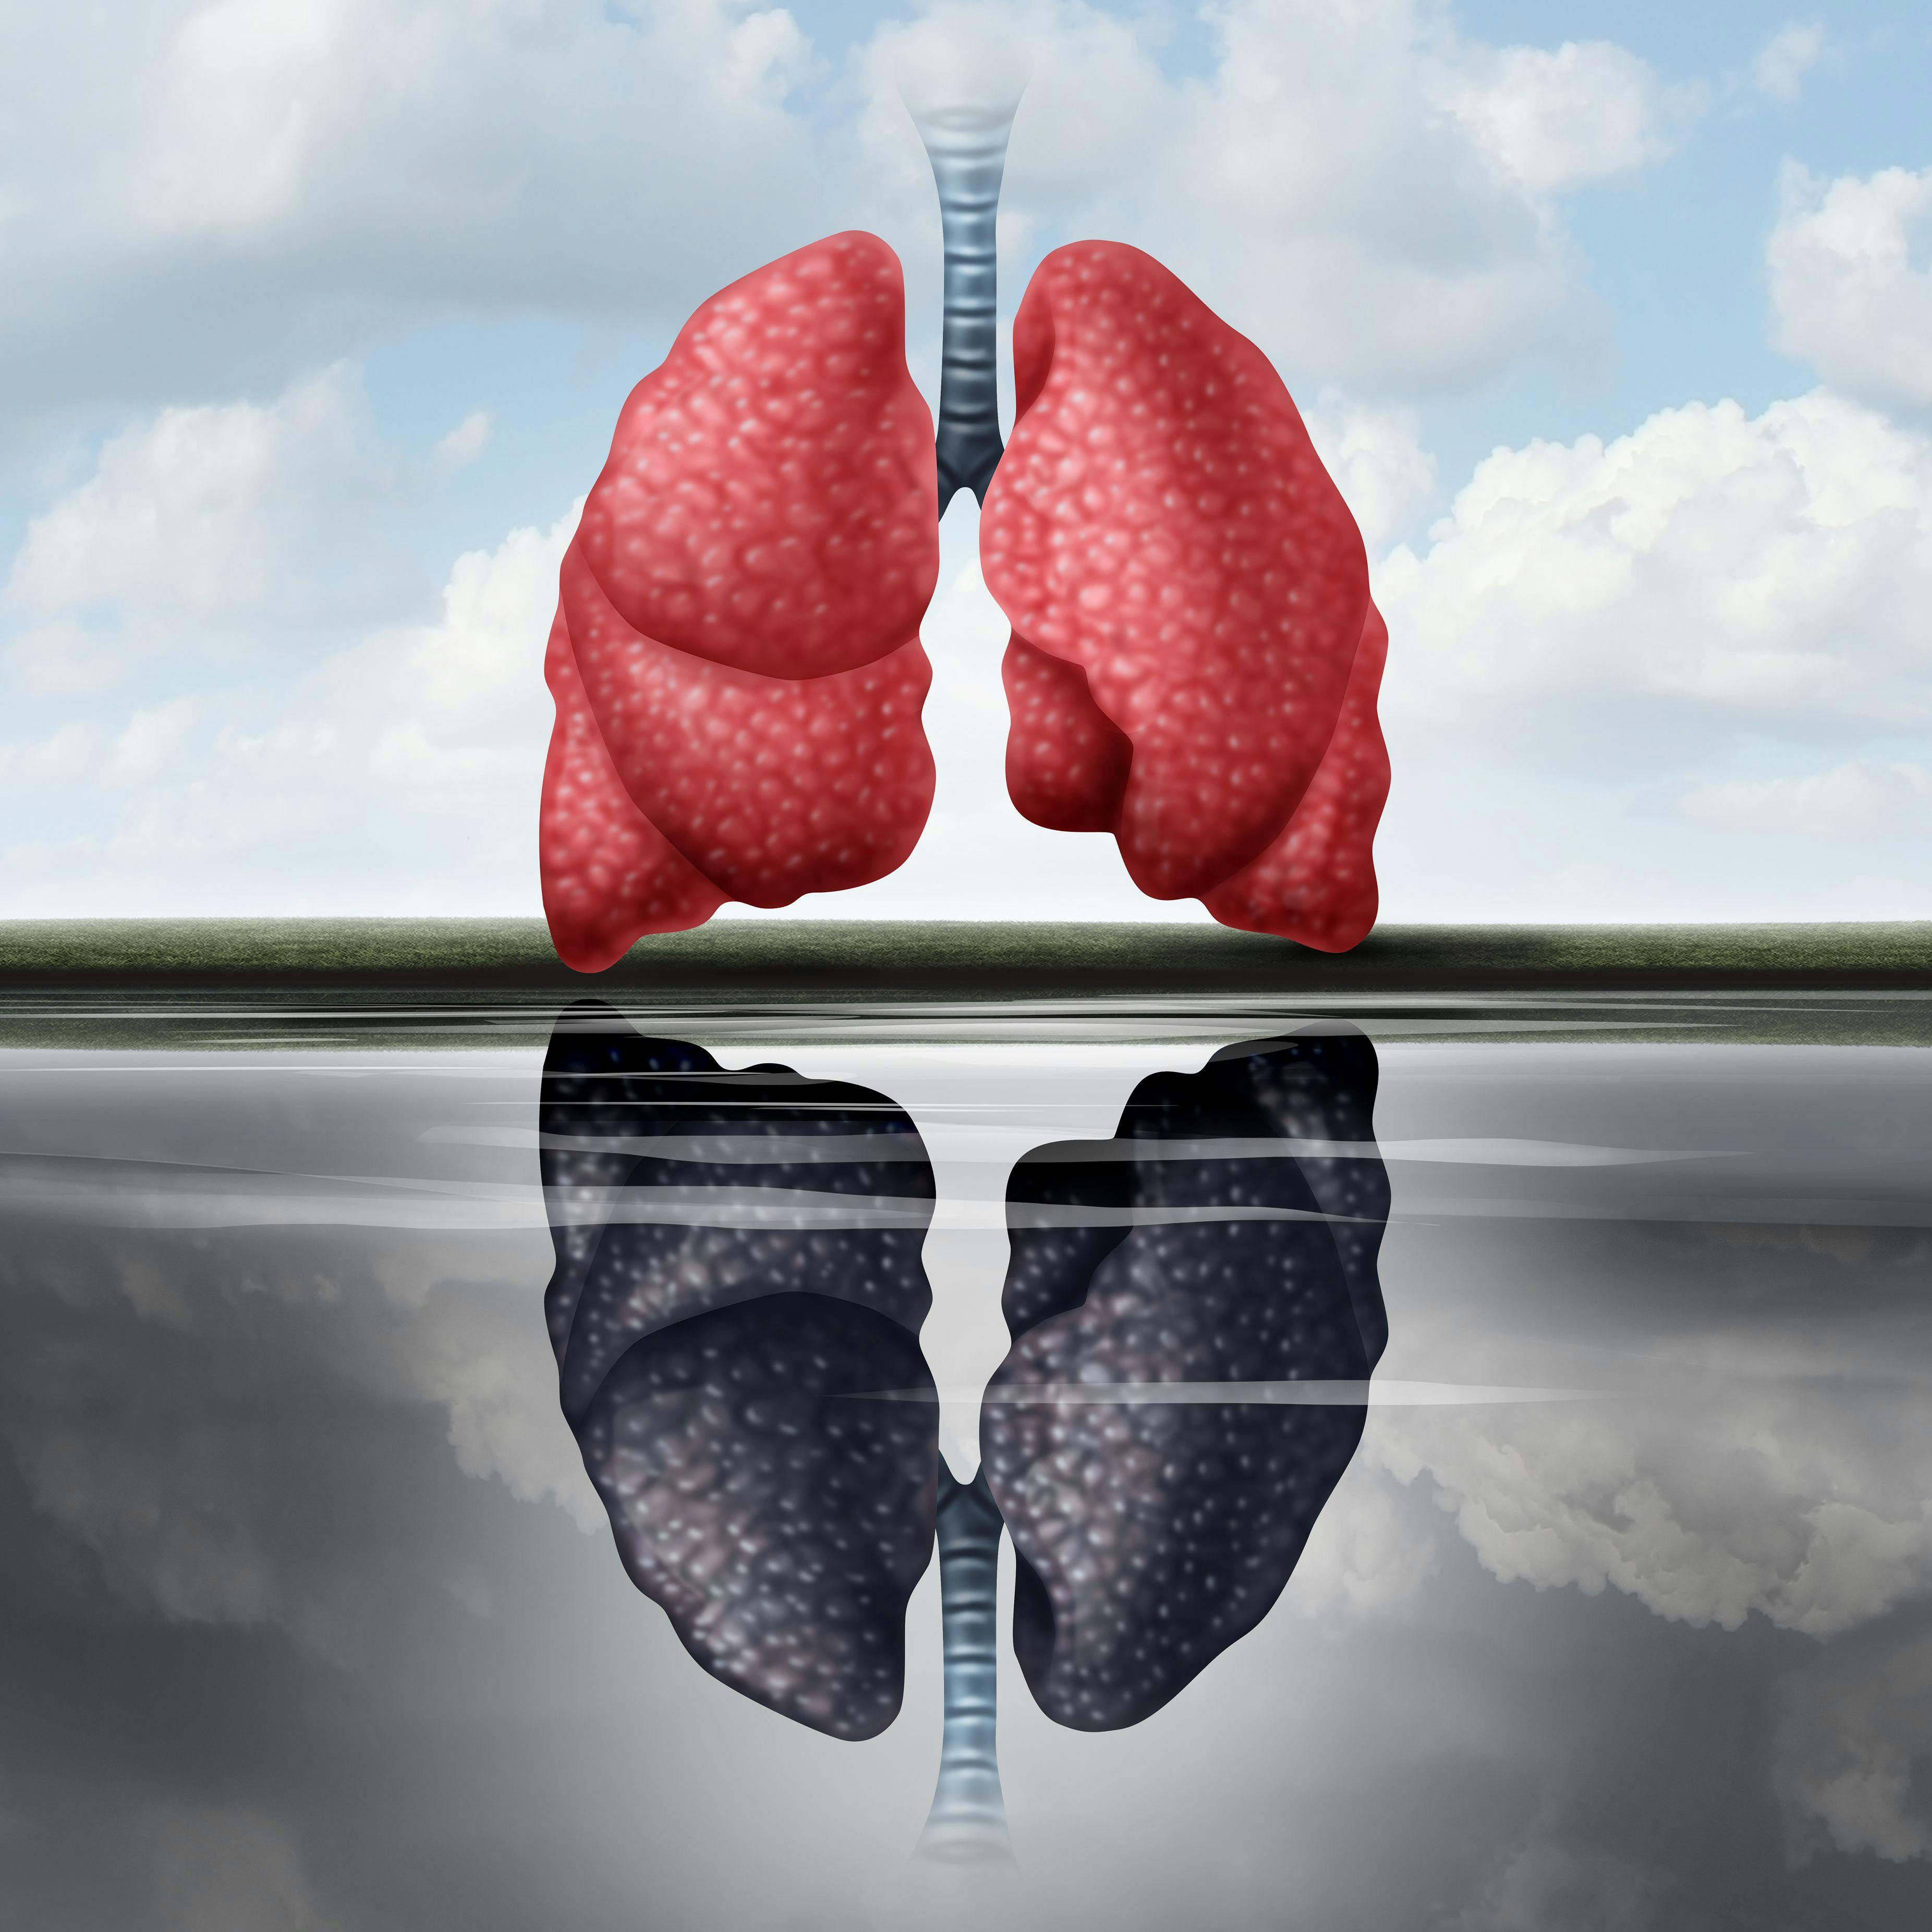 Patients in Risankizumab Phase 2a Trial Saw Some Asthma Symptoms Increase